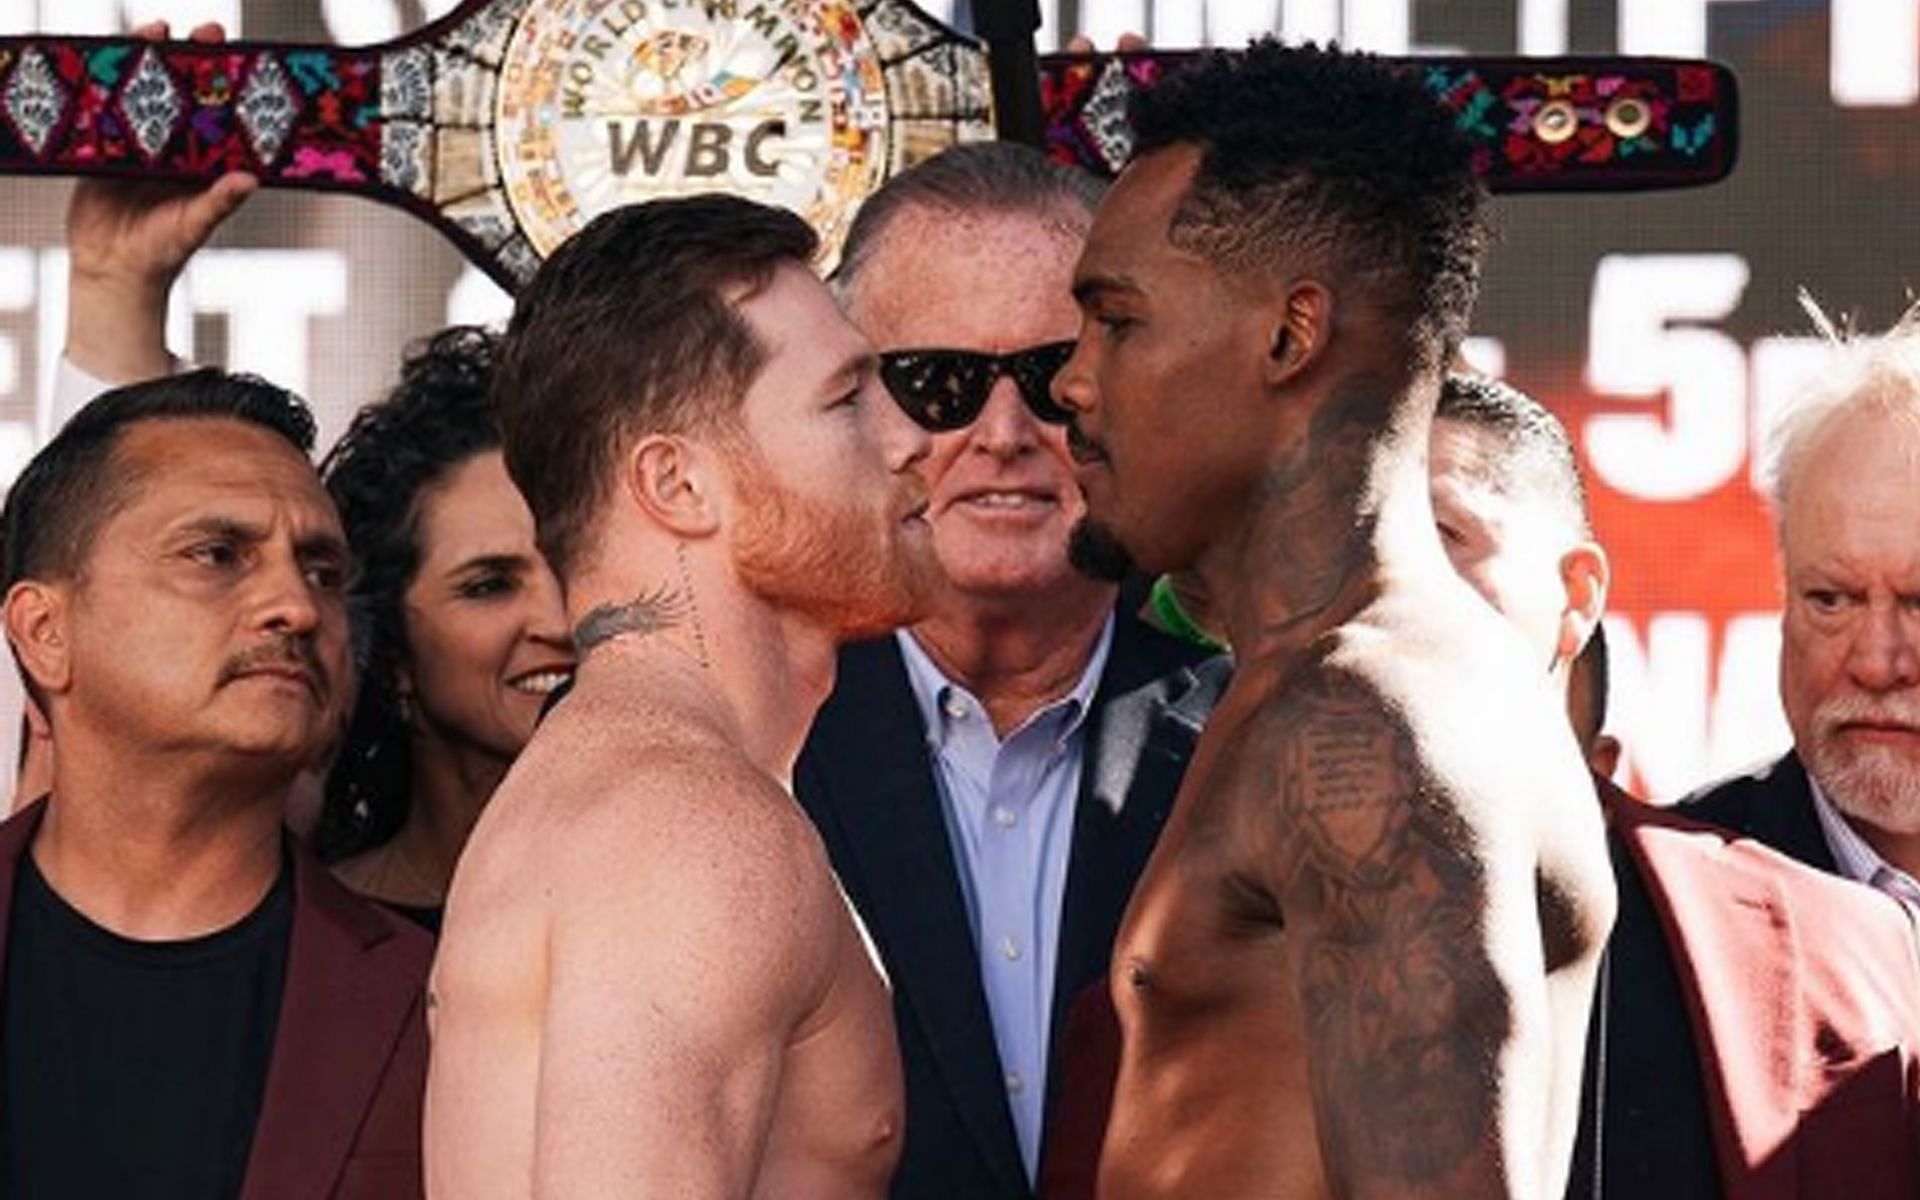 Canelo Alvarez (left) and Jermell Charlo (rght) during face-off (Image via @canelo Instagram)